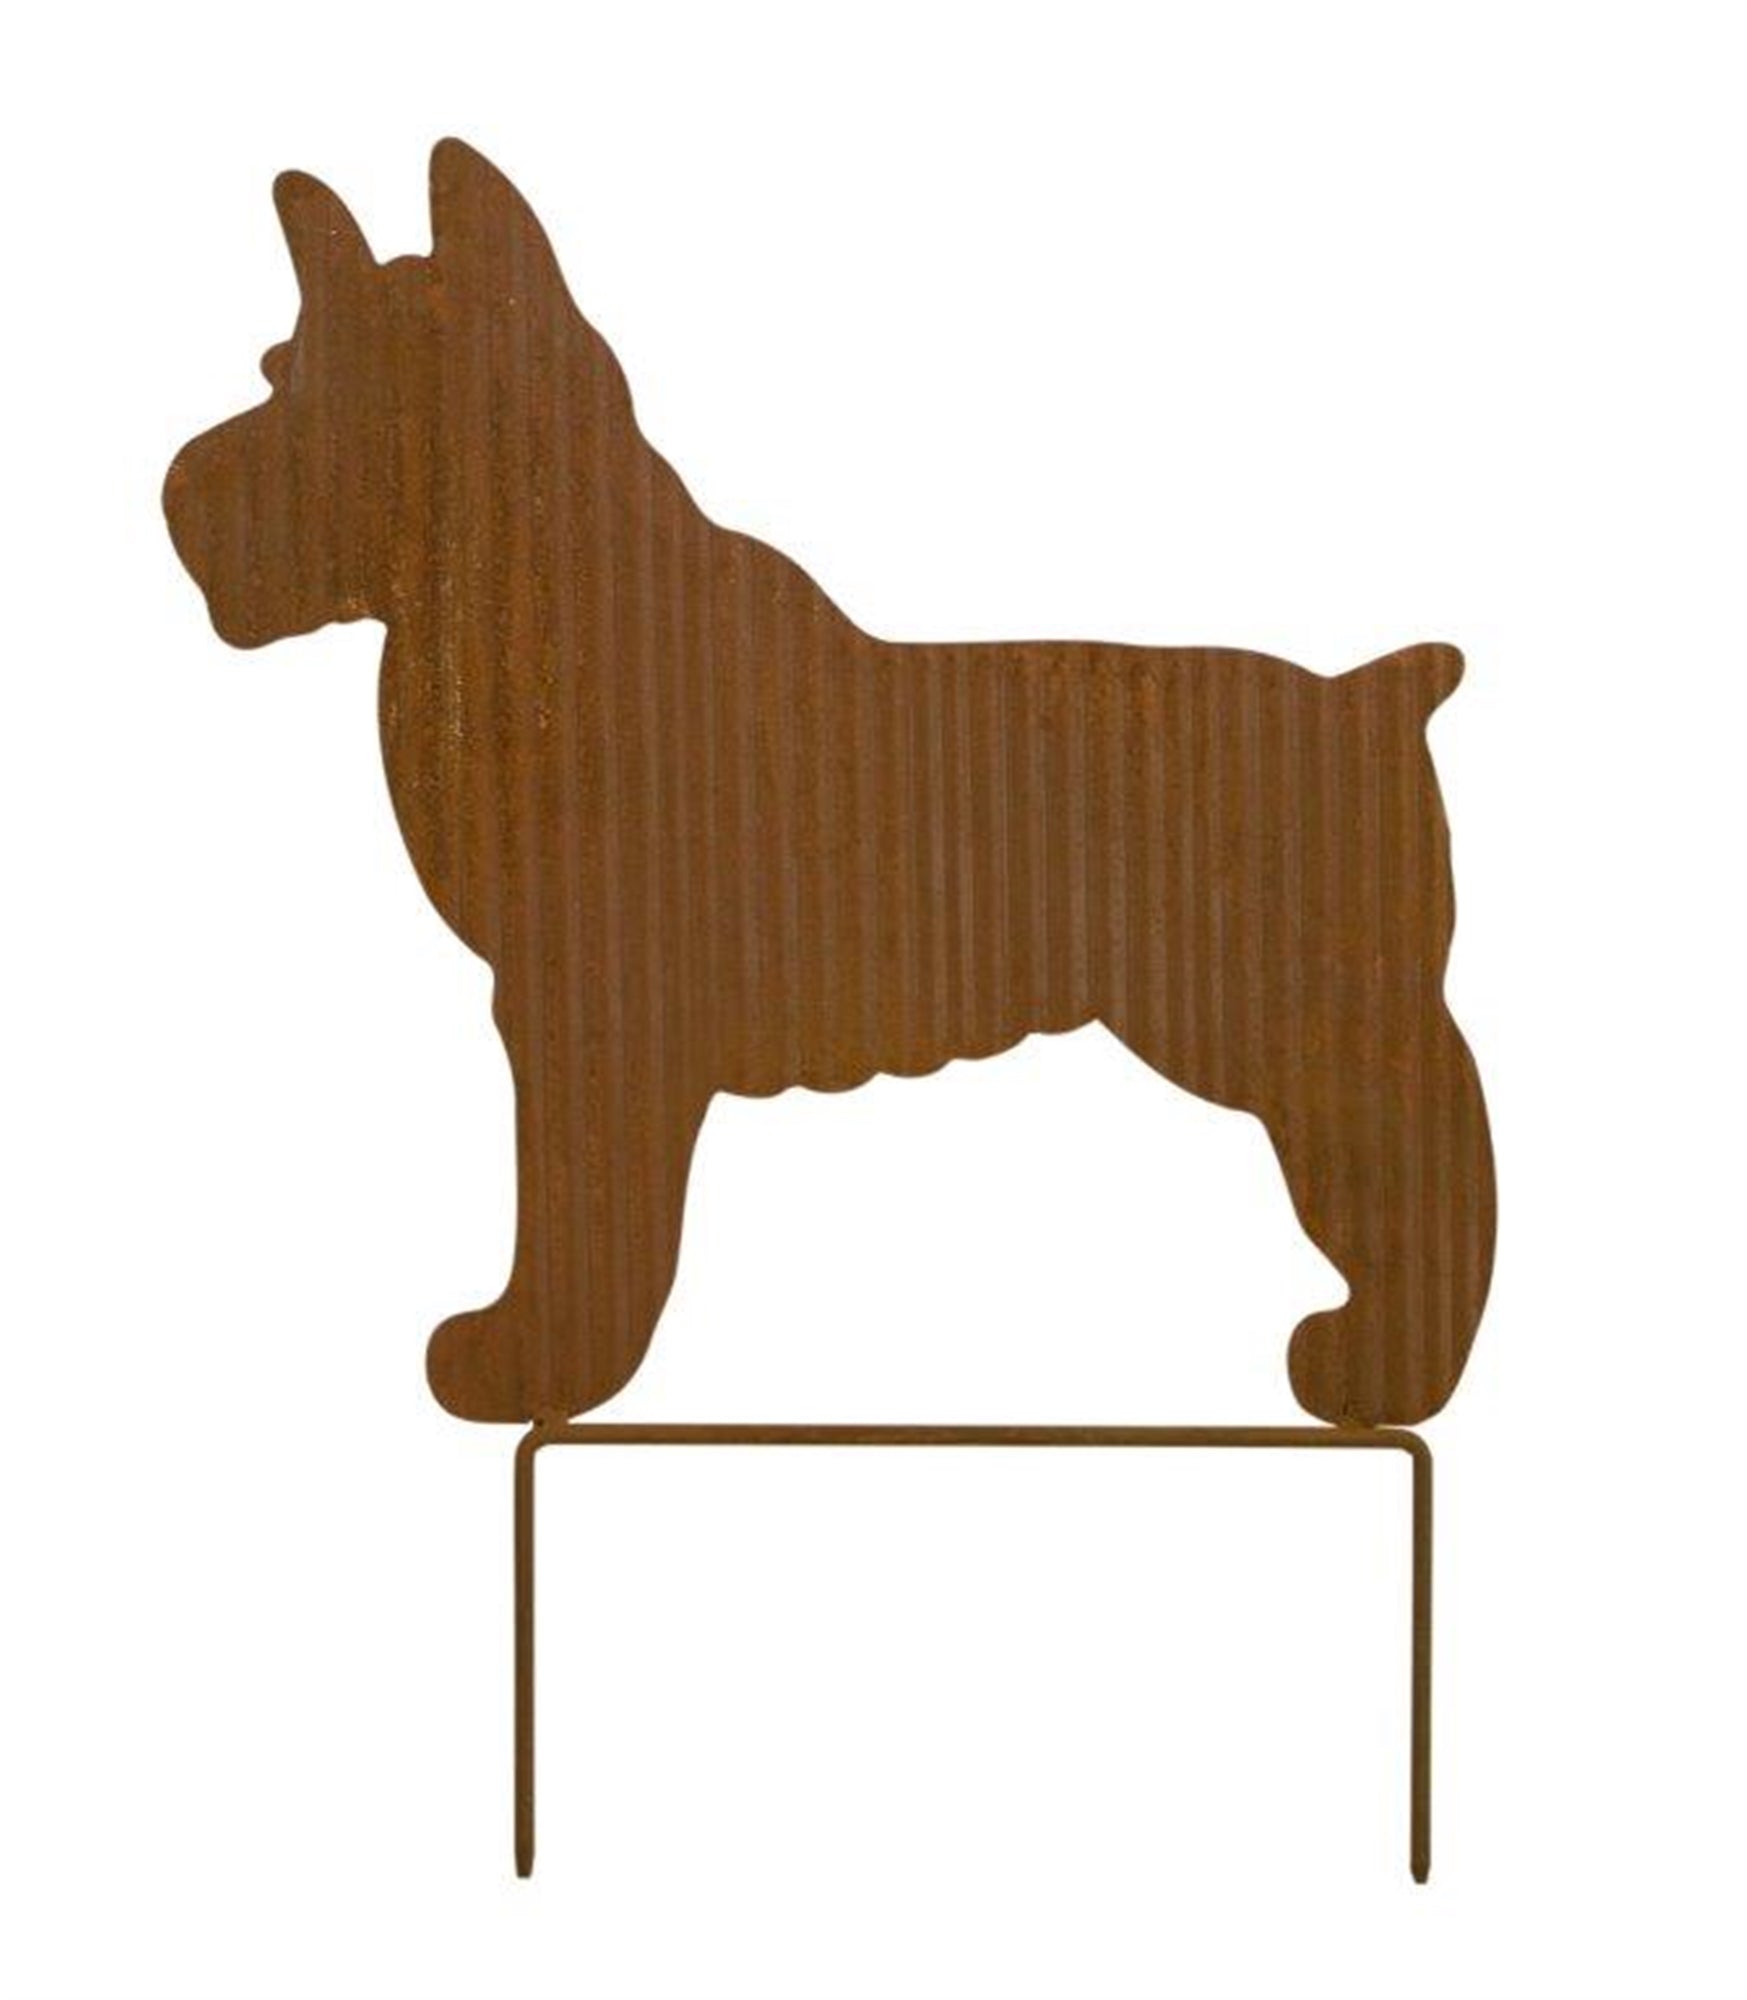 Terrier Dog Silhouette Garden Stake with Rustic Finish 15.75" - Outdoor Decor